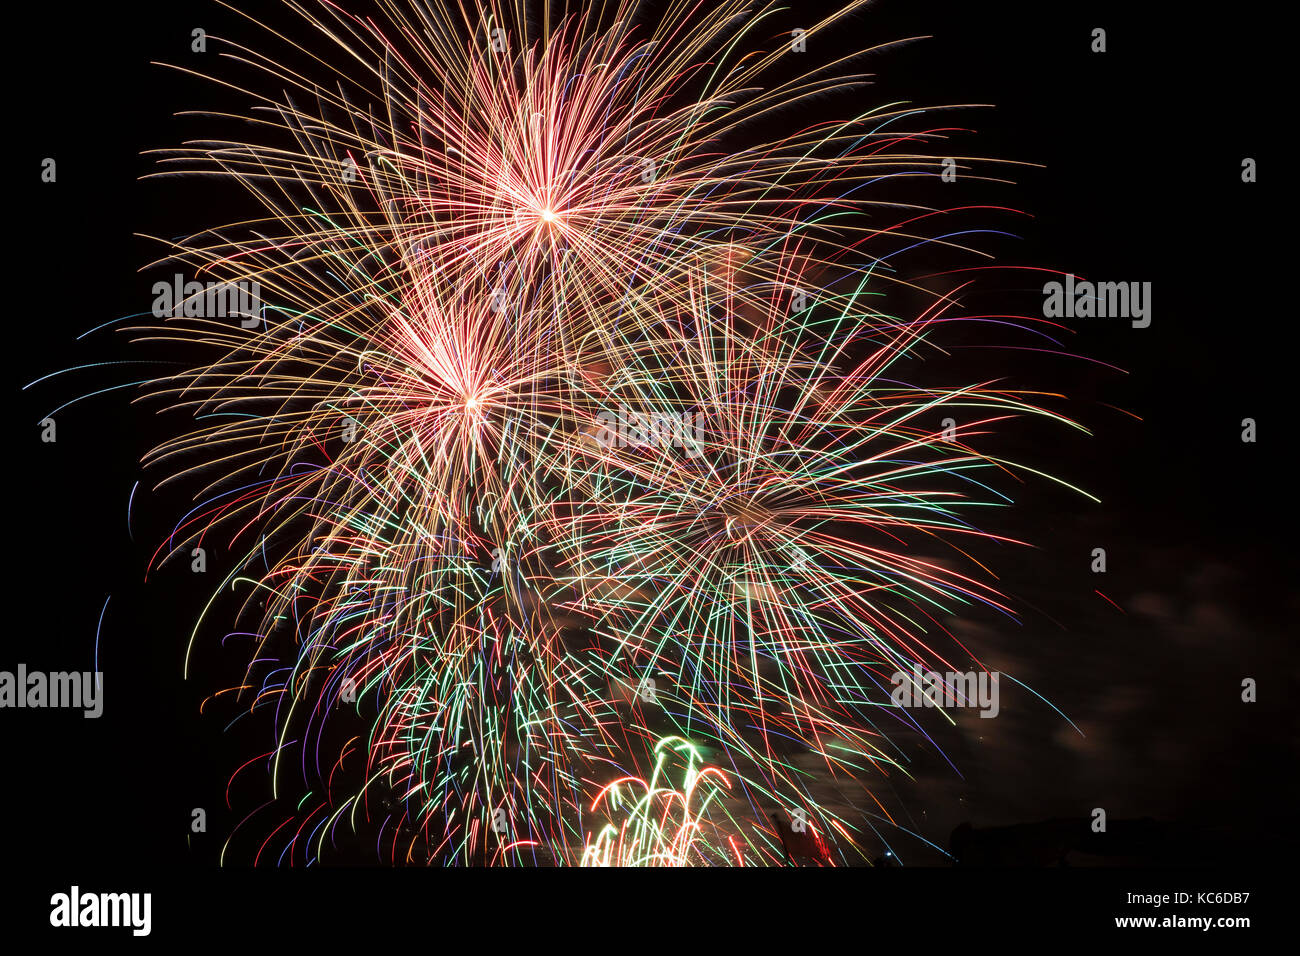 Bright colorful fireworks display in a night sky conceptual of a celebration, carnival, festival, 4th July, New Year, Guy Fawkes or party event. This  Stock Photo